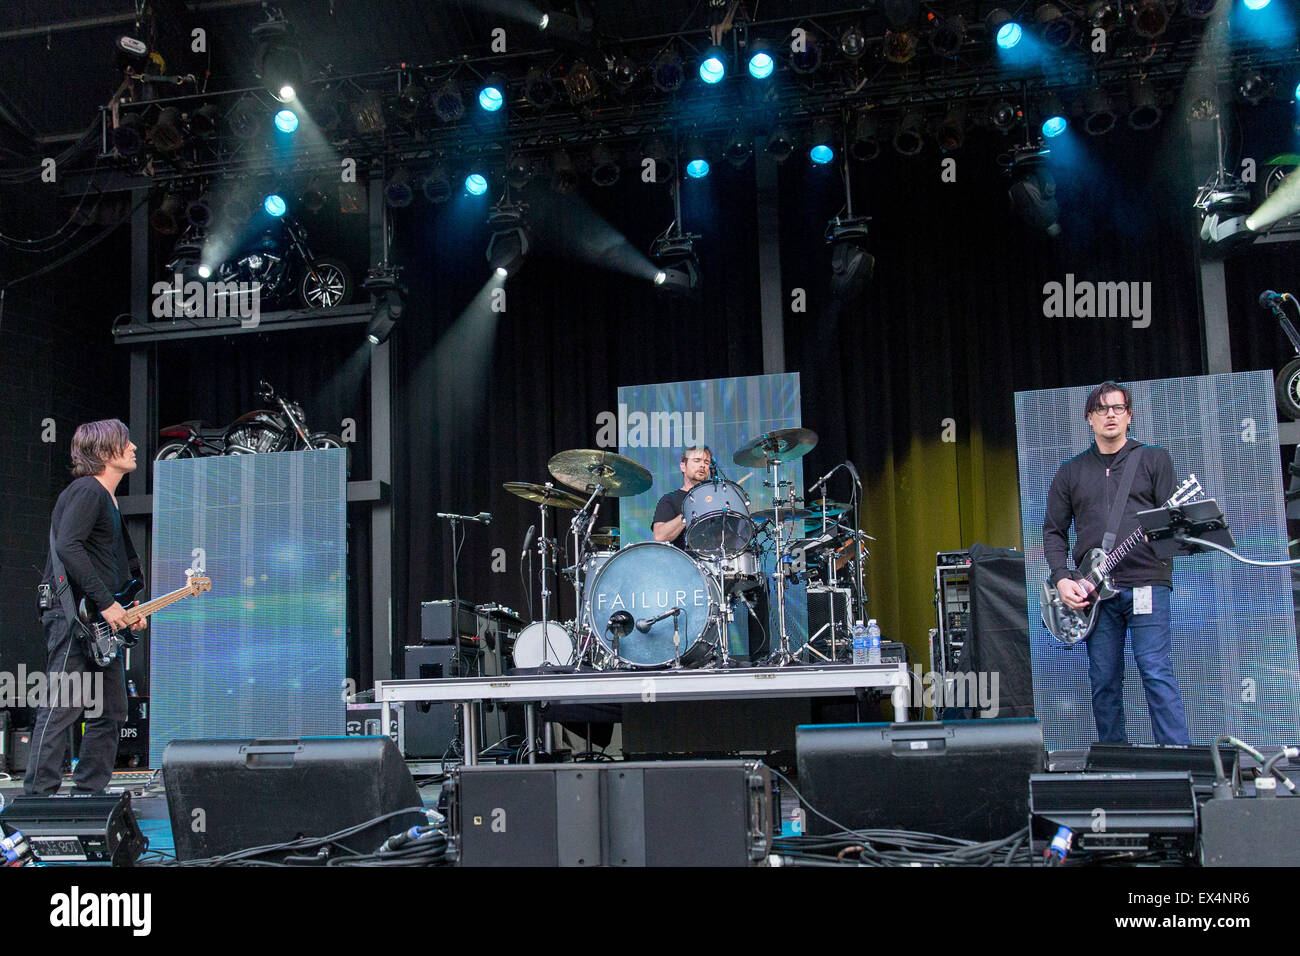 Milwaukee, Wisconsin, USA. 4th July, 2015. GREG EDWARDS, KELLII SCOTT and KEN ANDREWS (L-R) of Failure performs live on stage at the Summerfest Music Festival in Milwaukee, Wisconsin © Daniel DeSlover/ZUMA Wire/Alamy Live News Stock Photo